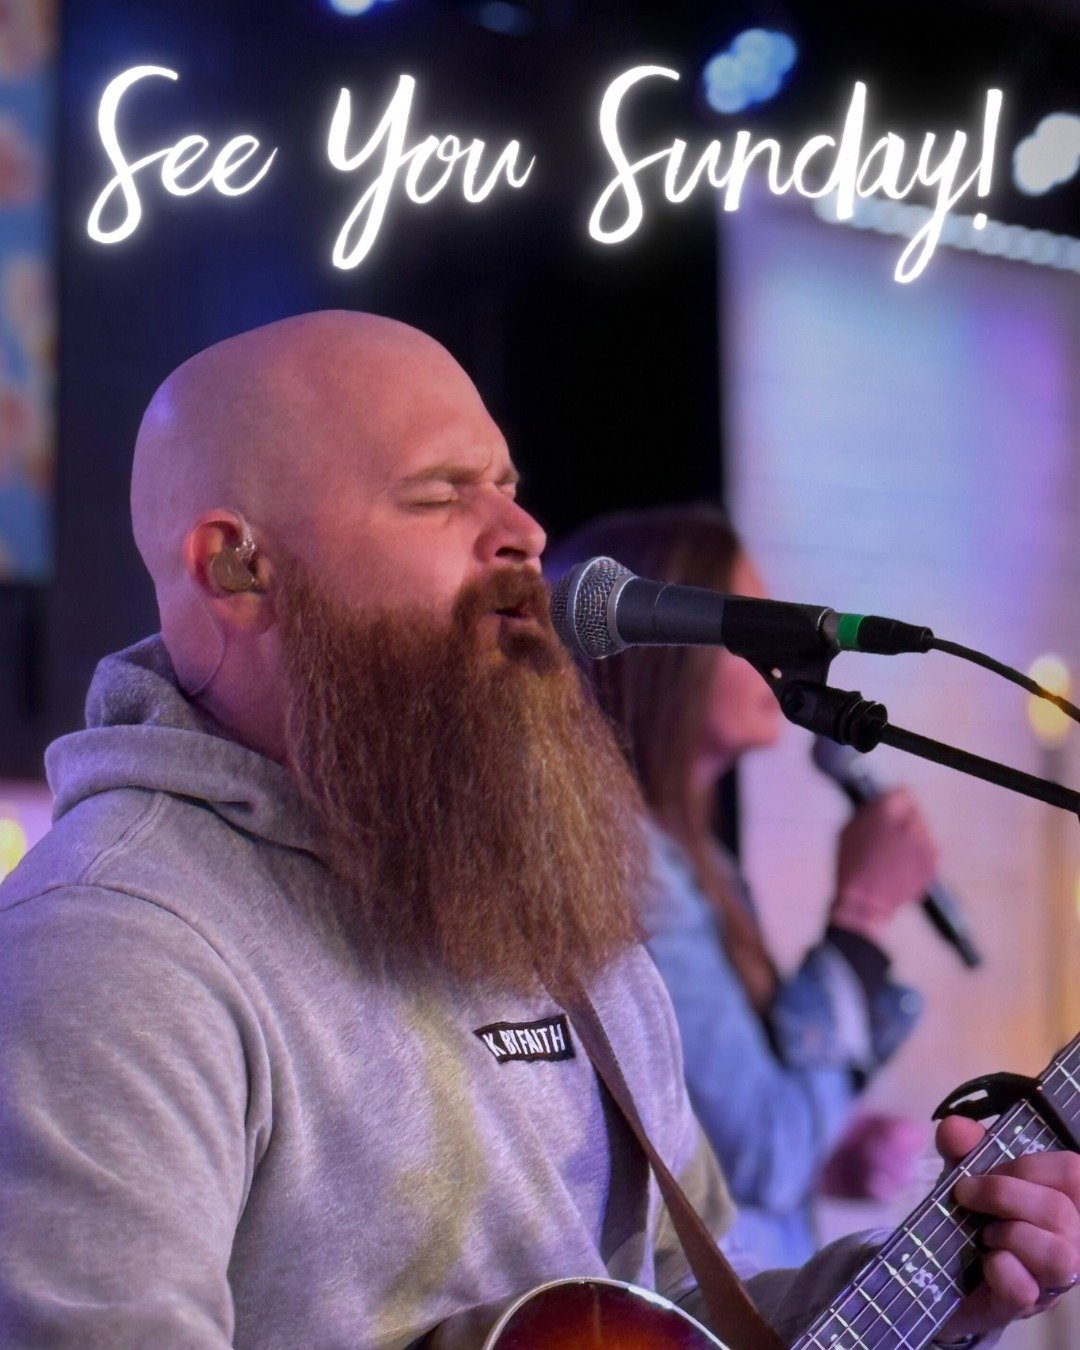 See you tomorrow Rock Church family! ❤️🙌

Which campus will you be joining us at? 💭
⏰: 8AM, 9:30AM, 11AM
📍: Bangor, Hampden, and Old Town
Can't make it in person? No problem, stream our live services at 9:30am and 11am! 📲🤗